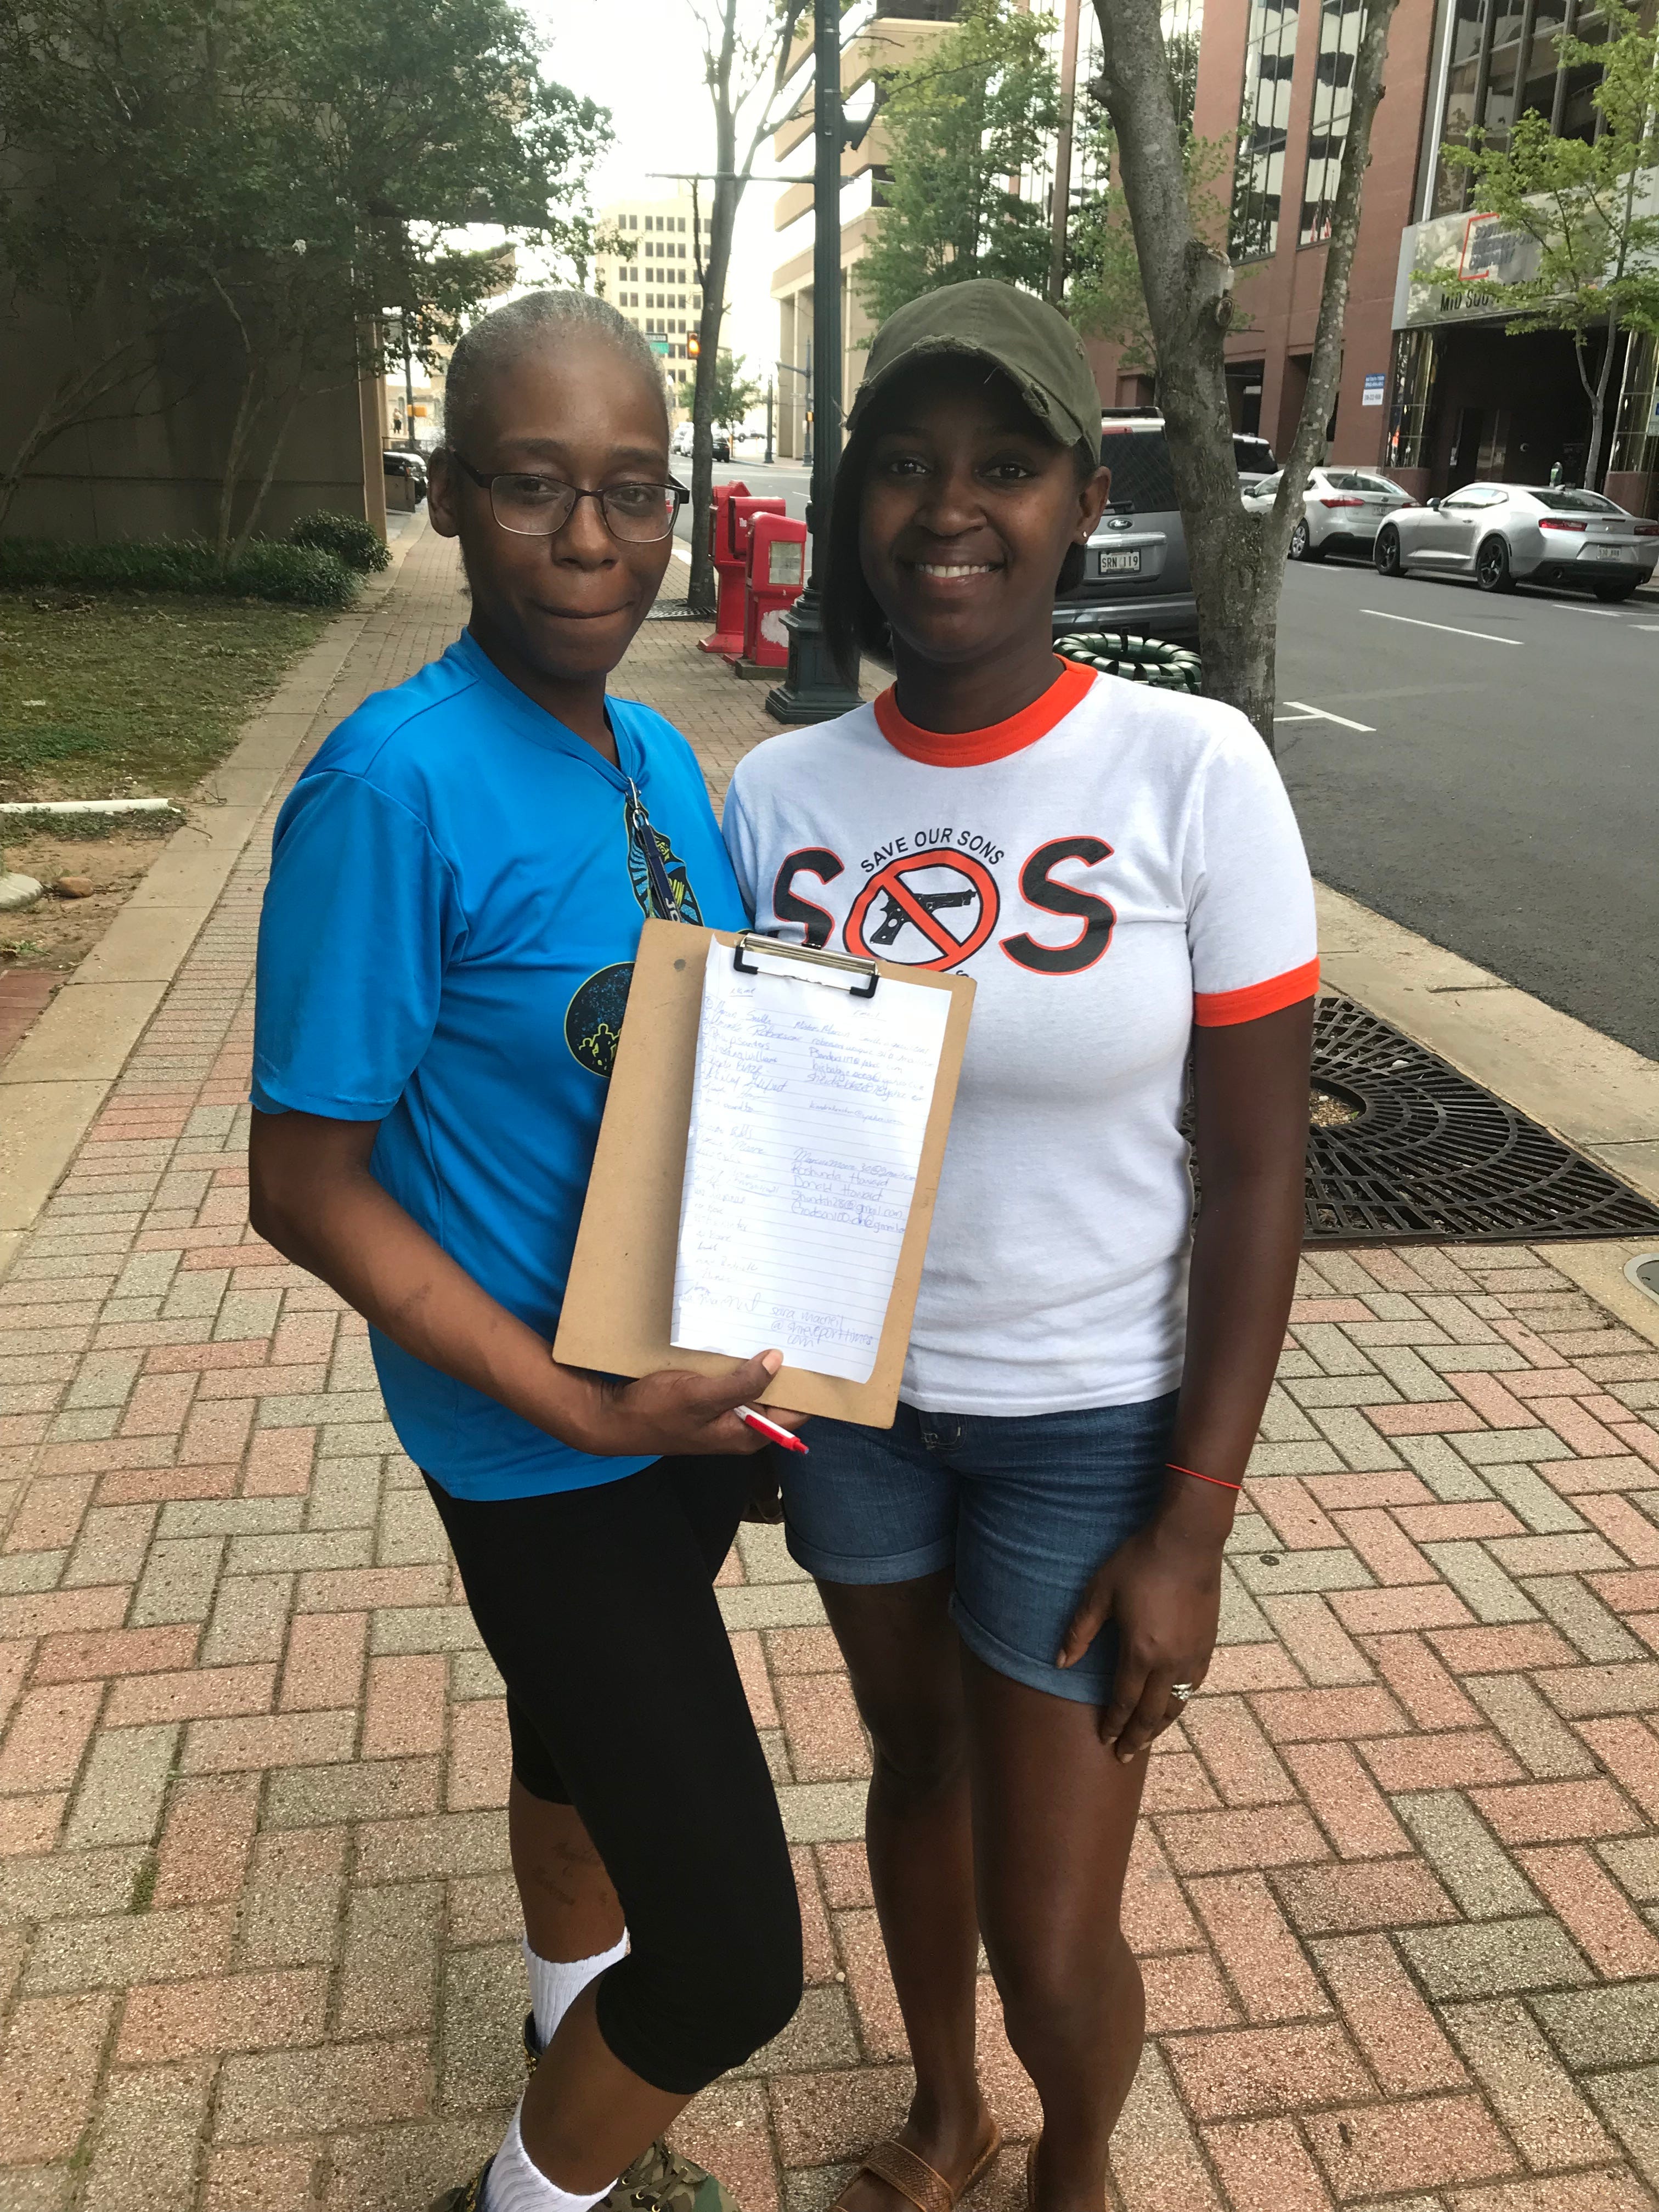 Amaelie Roberson and Beatricious Foster gathered signatures in support of equal employment opportunities for felons Monday.